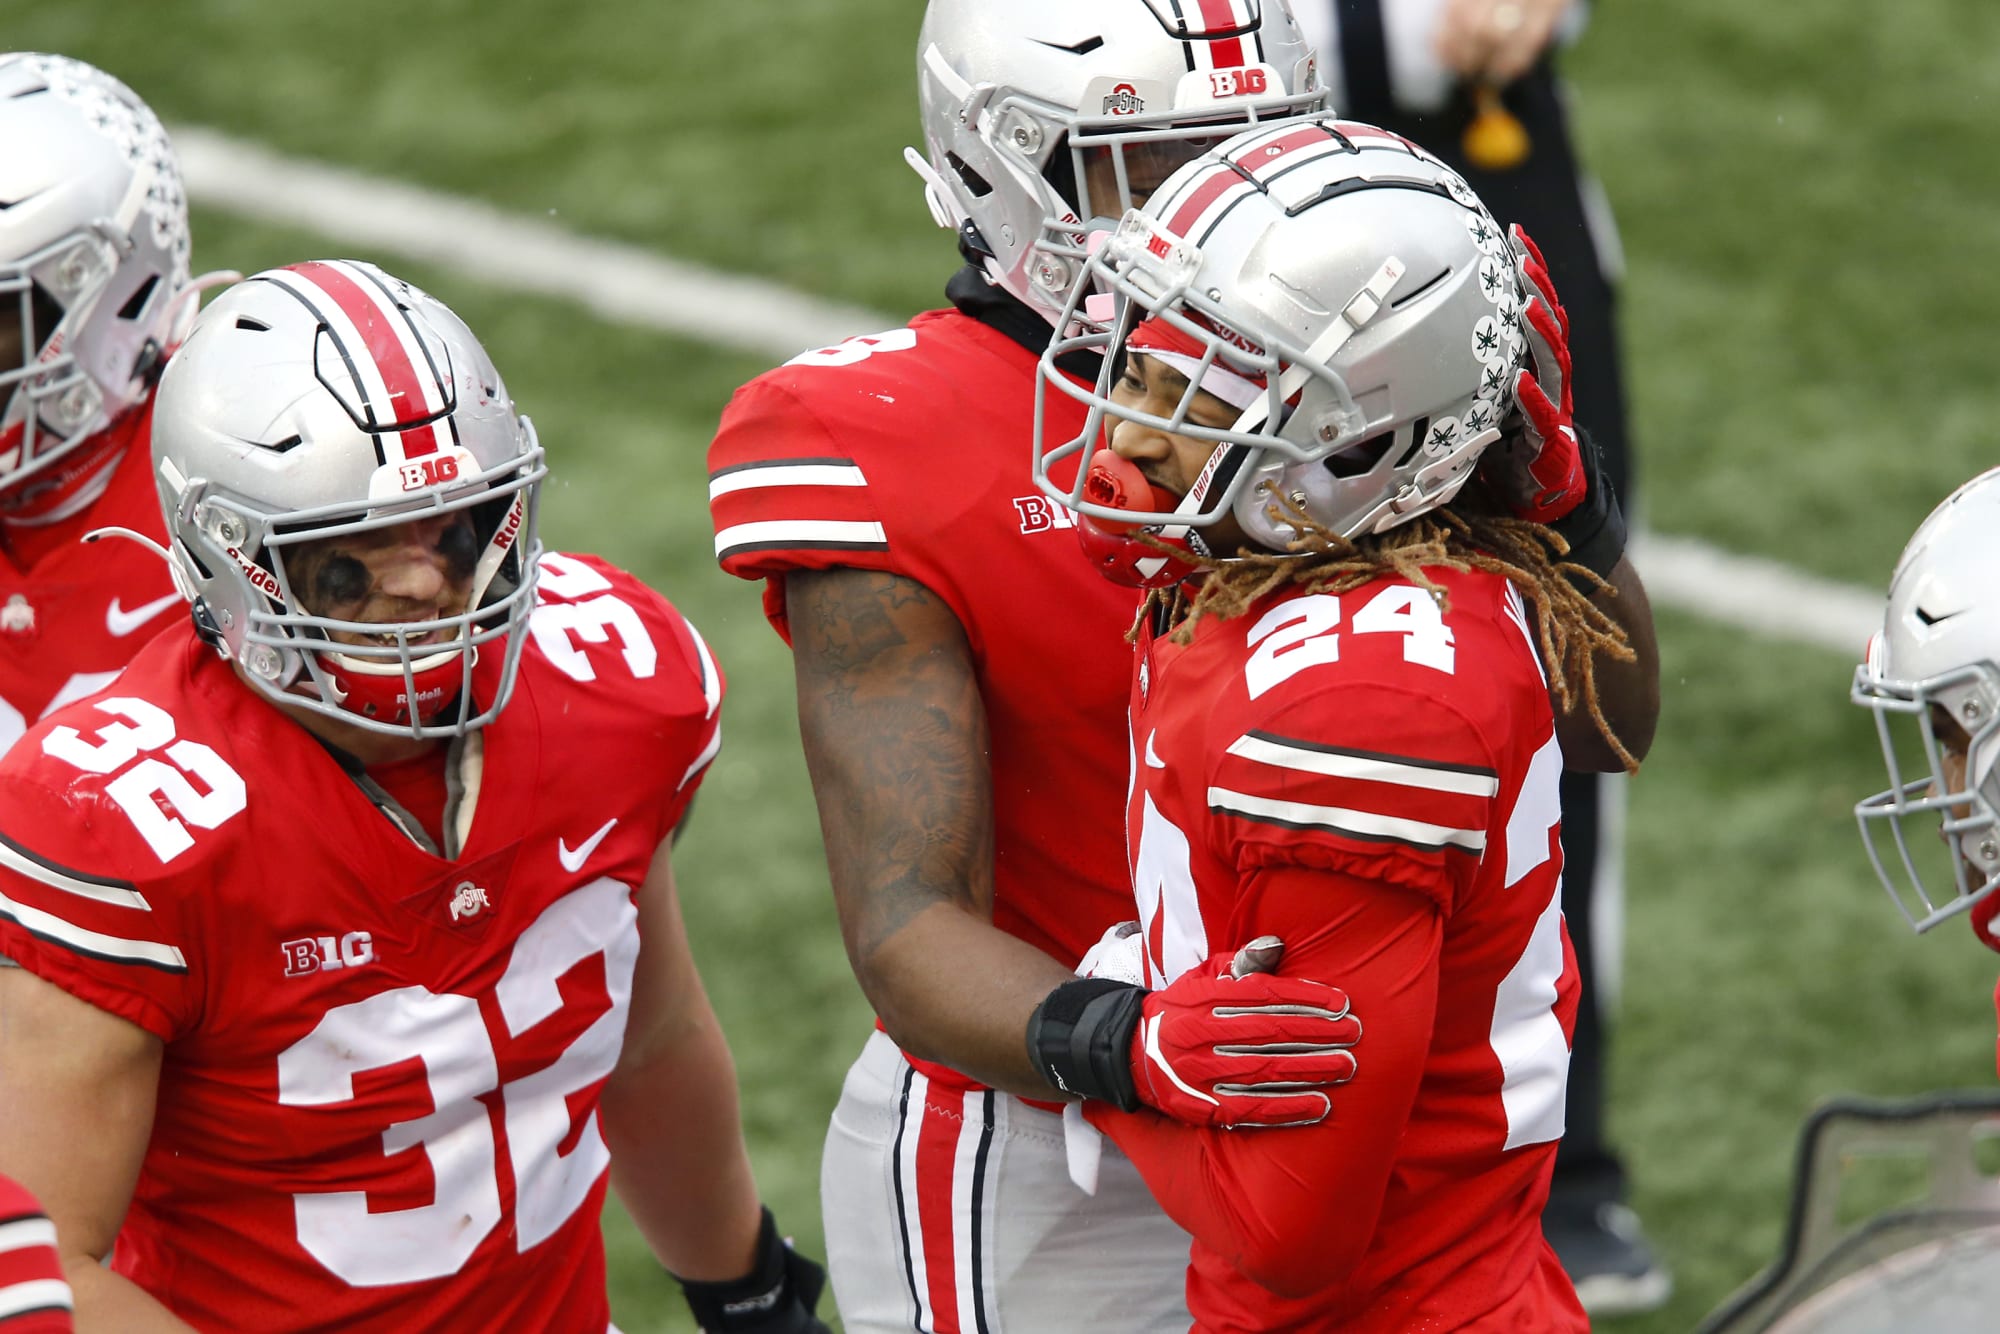 Former Ohio State Football player already might get traded as a rookie